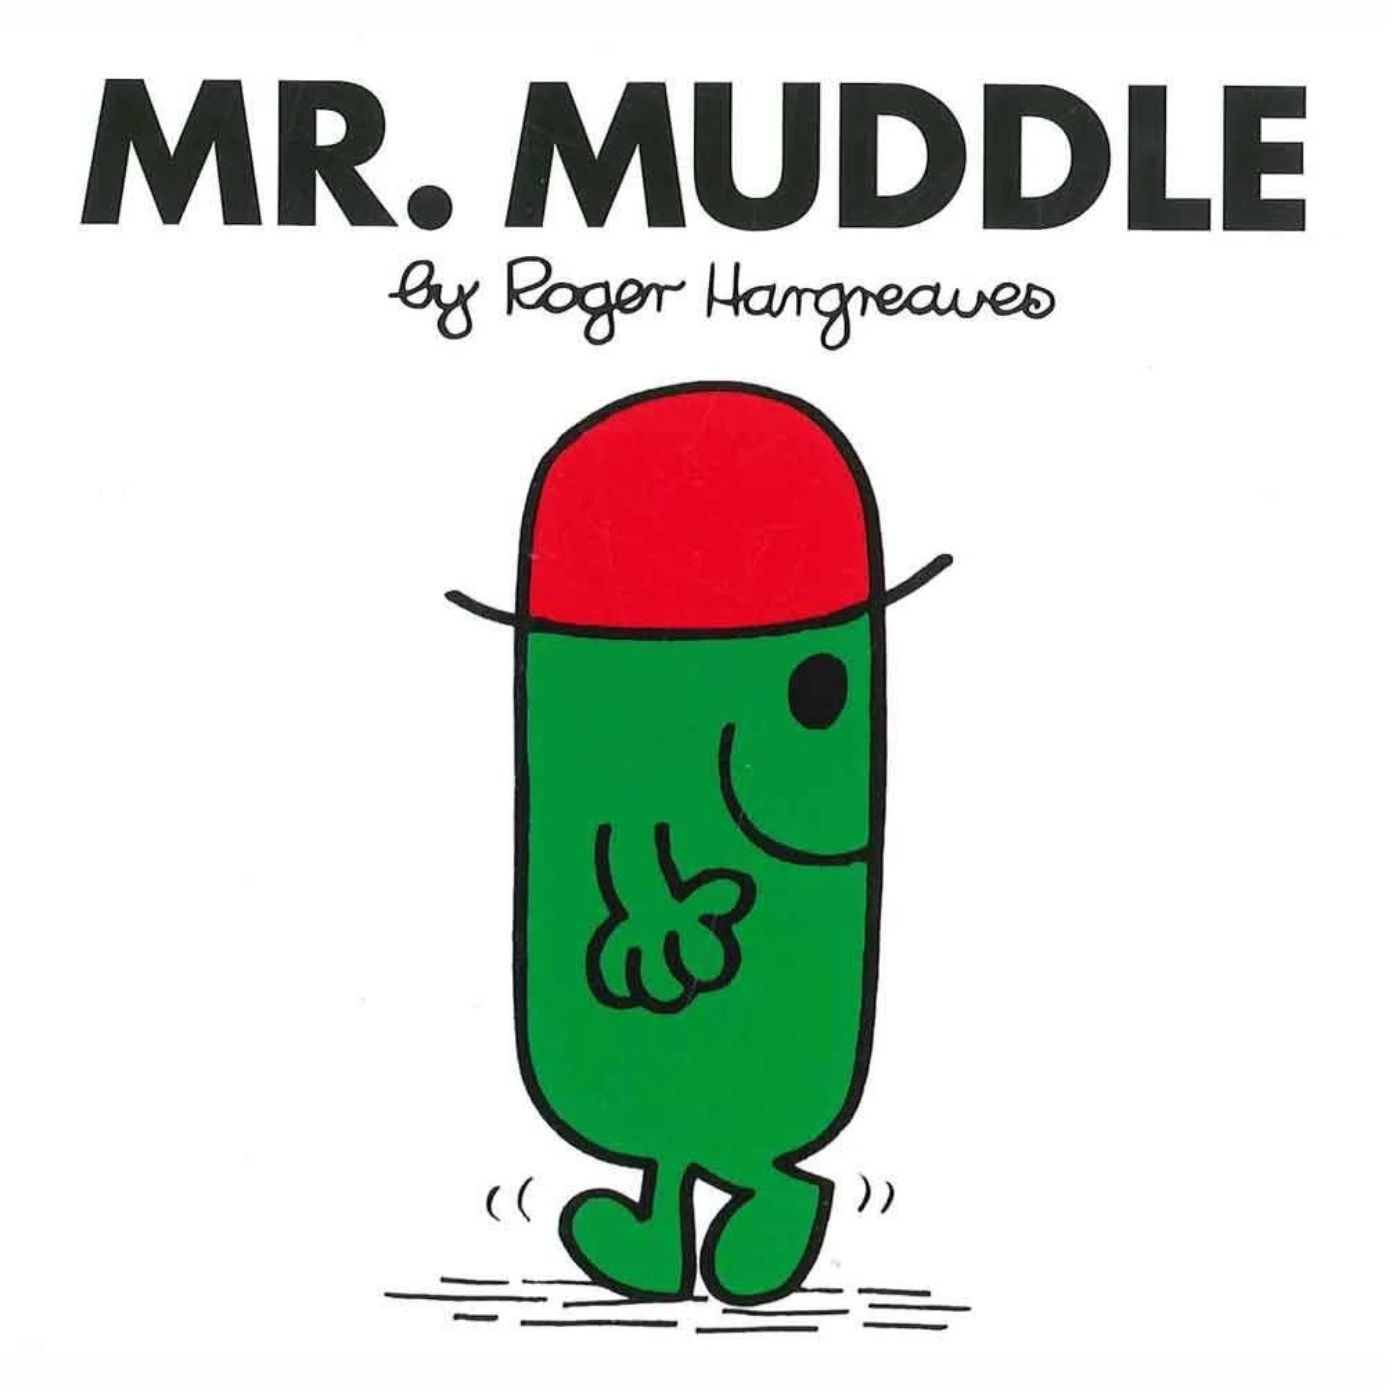 Mr. Muddle by Roger Hargreaves 23 of 24 Tribute - Read by Martyn Kenneth